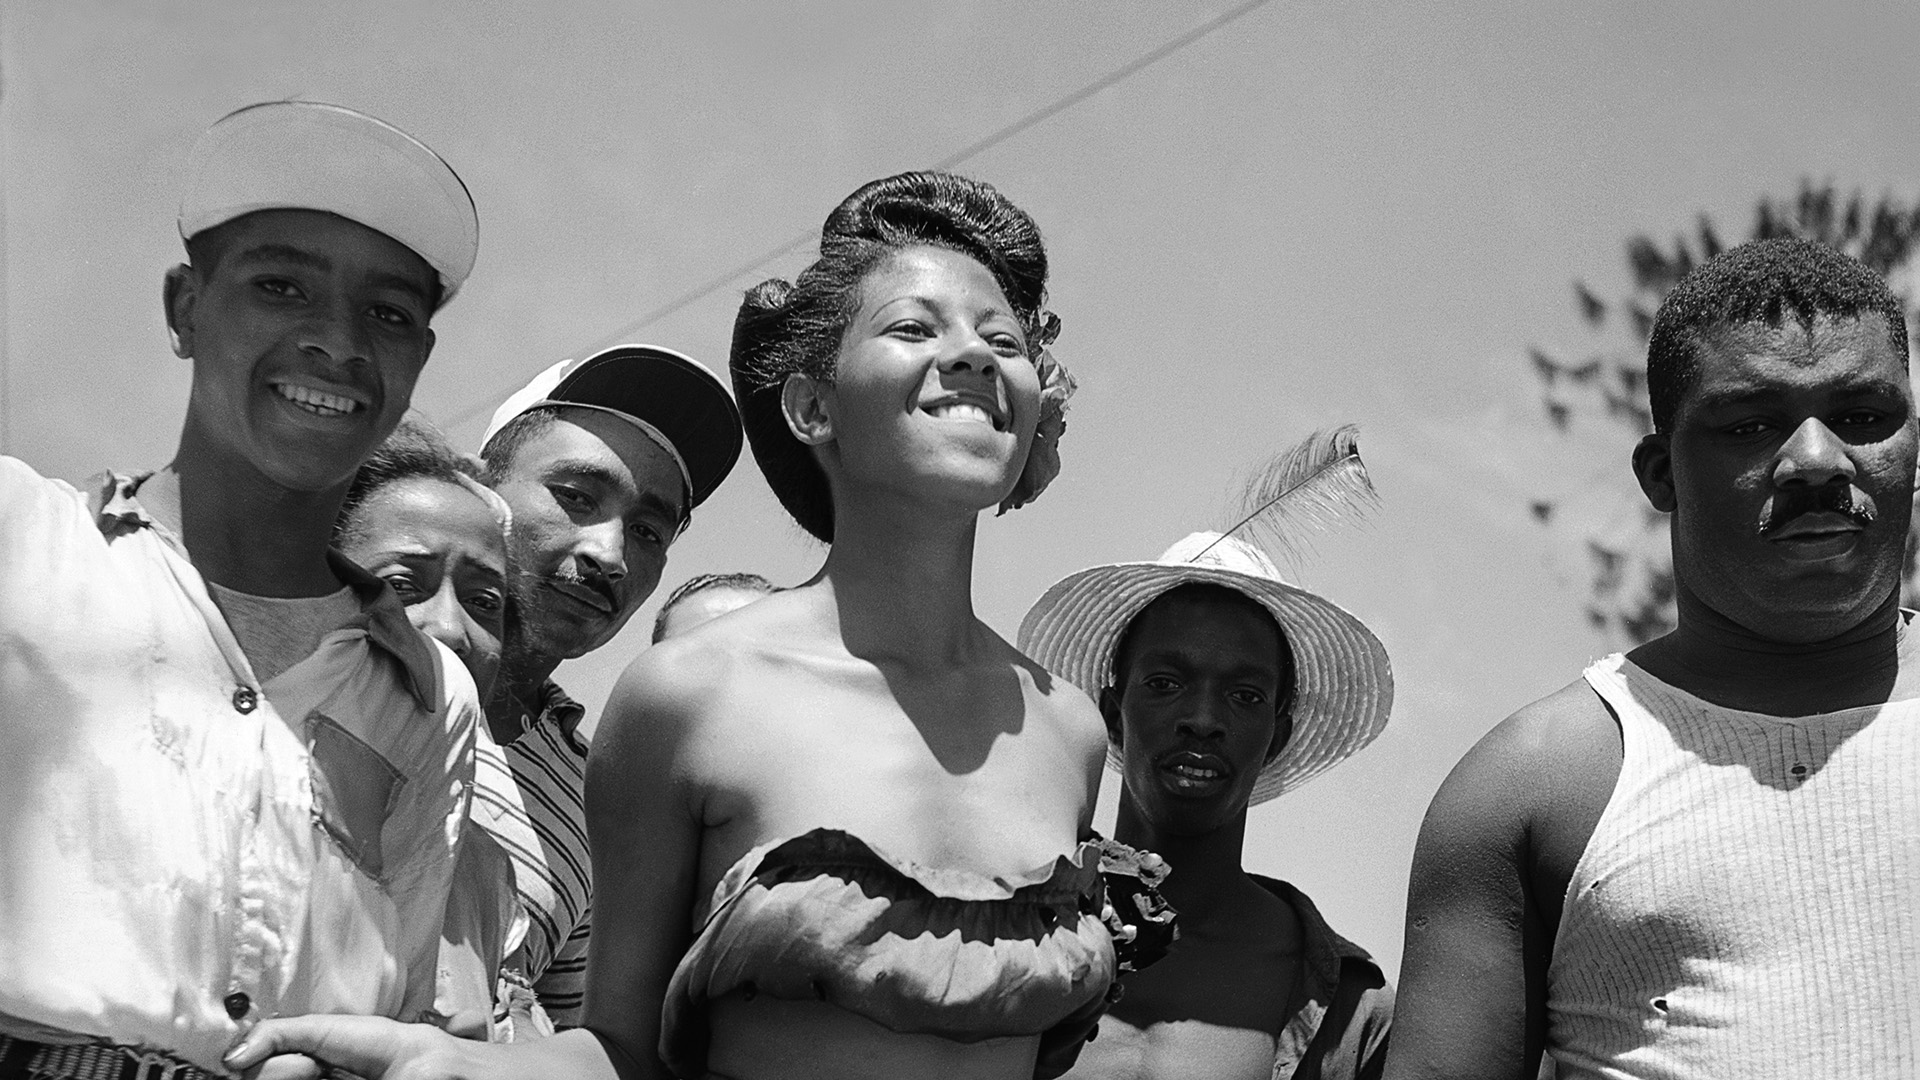 What did the Rio Carnival look like in the 50s and 60s? — Blind Magazine